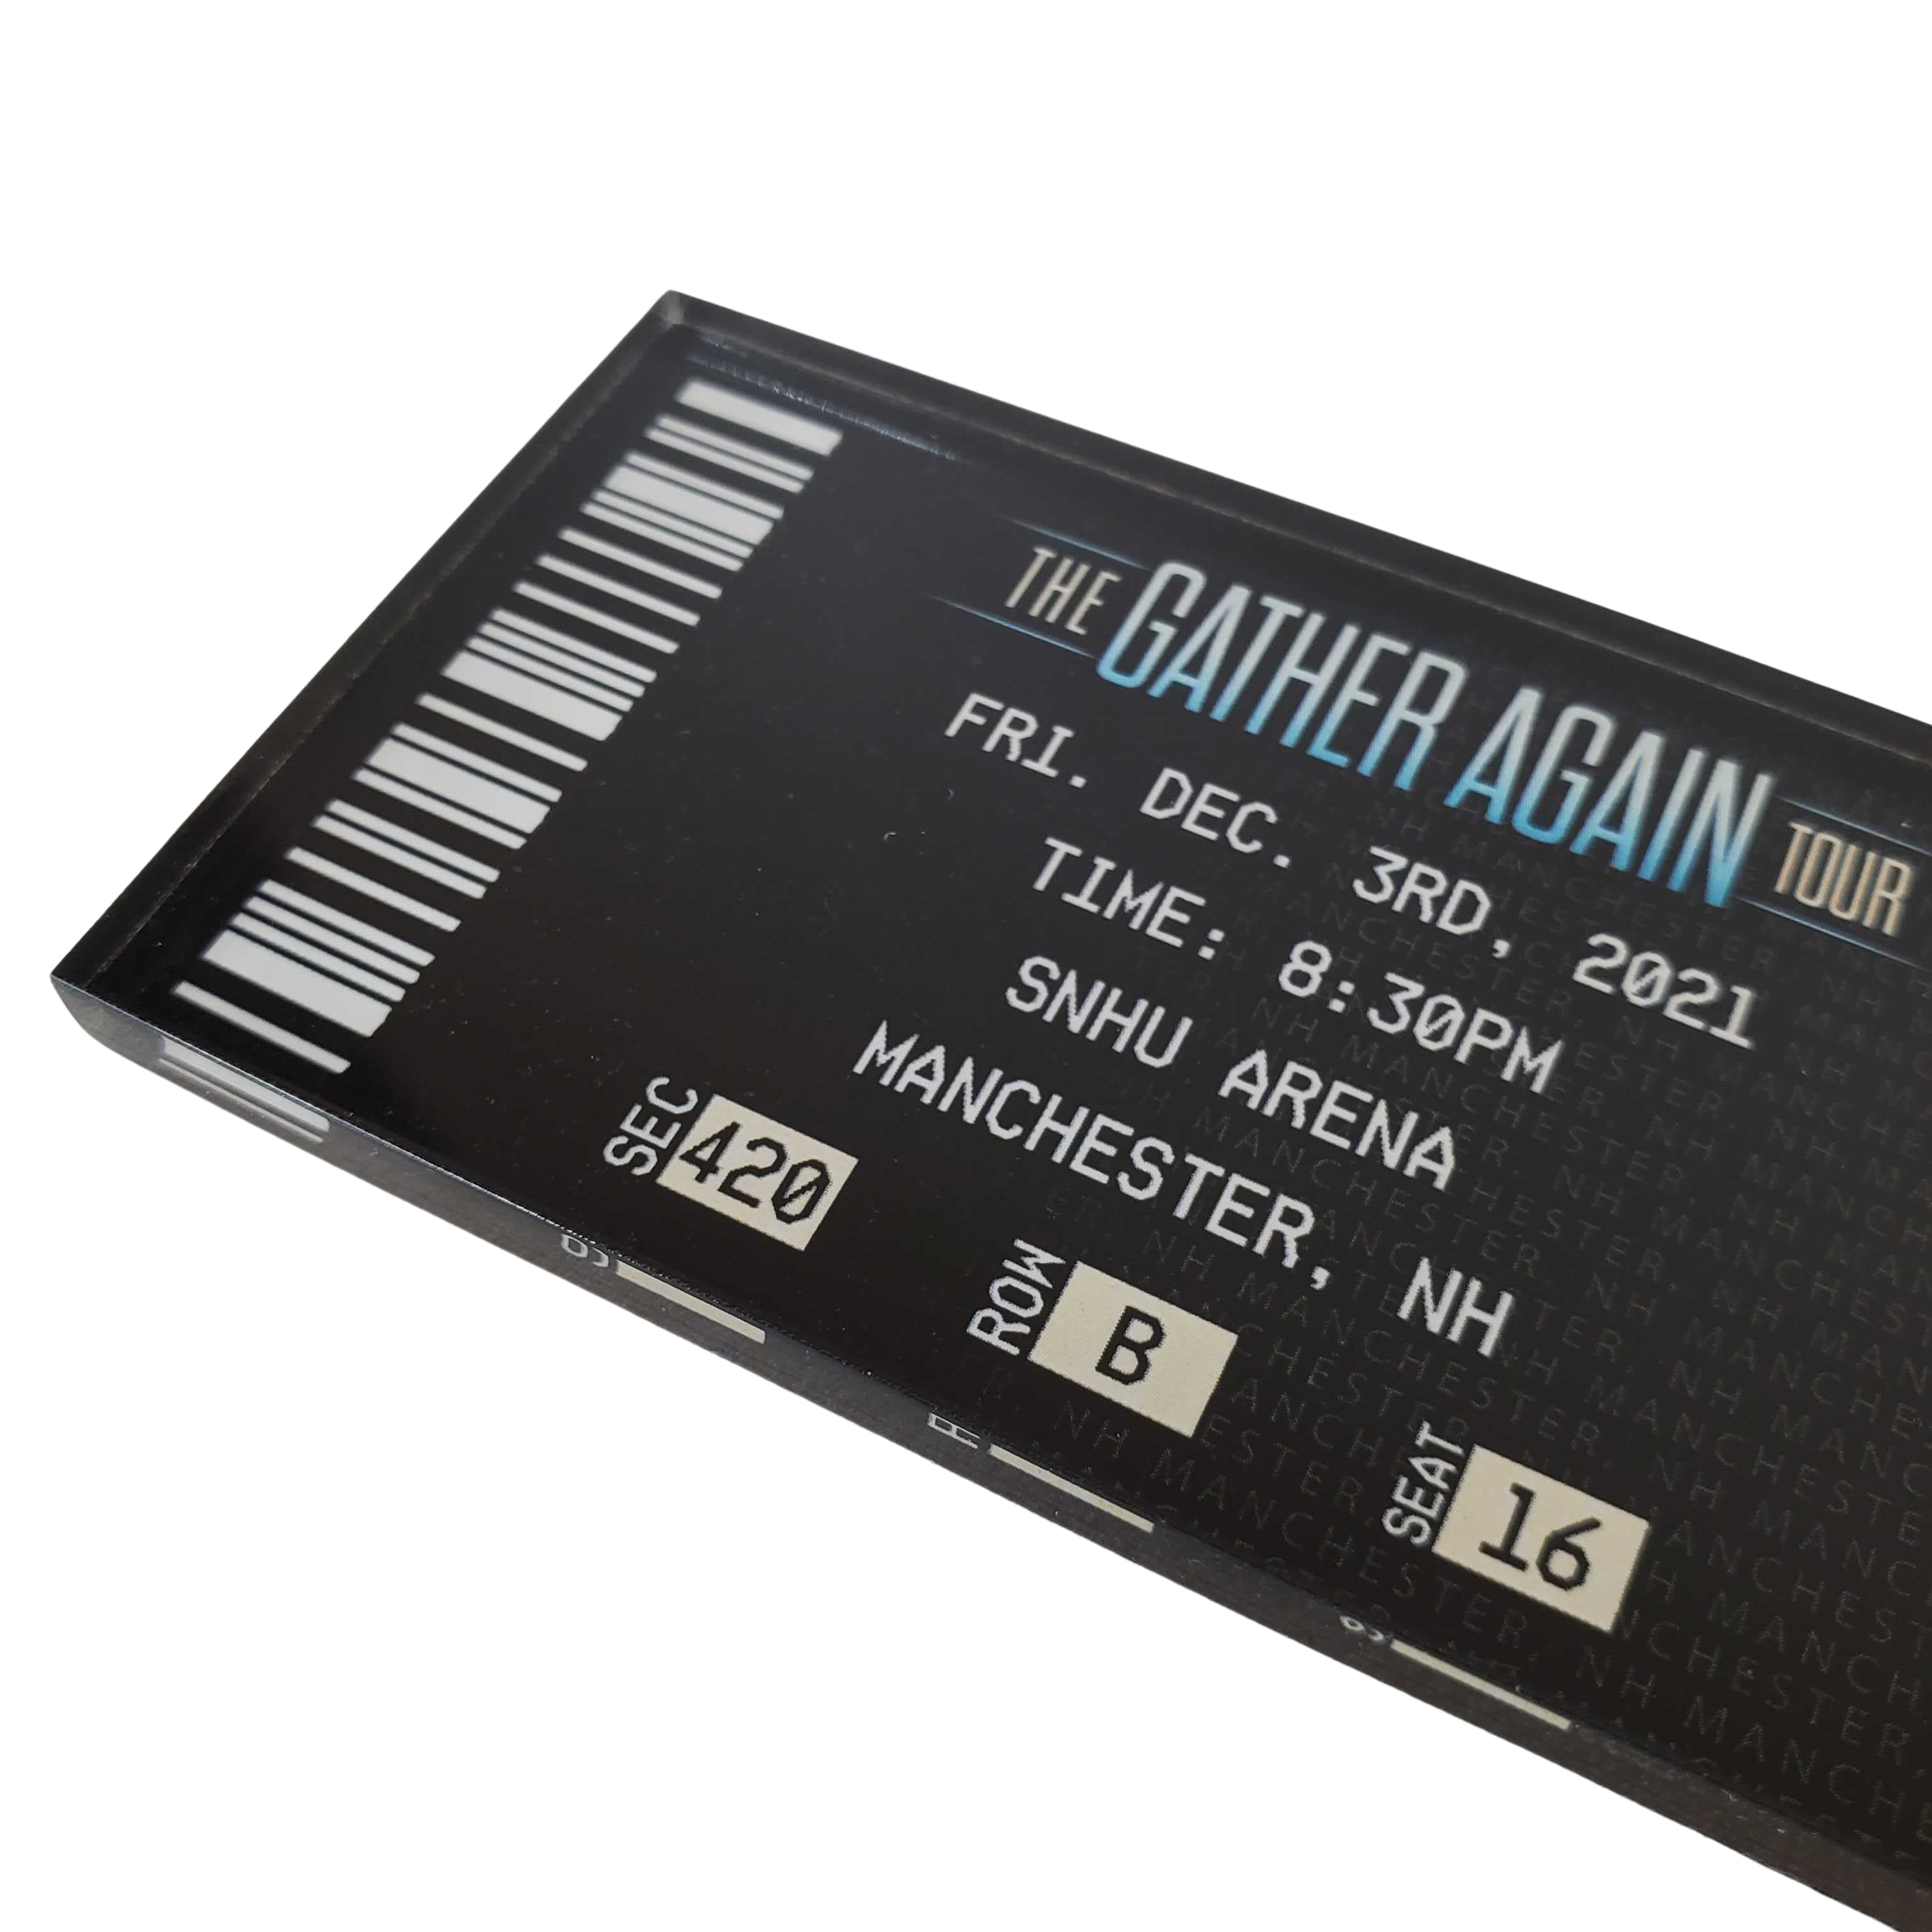 Gather Again Tour Ticket Magnet - Manchester, NH